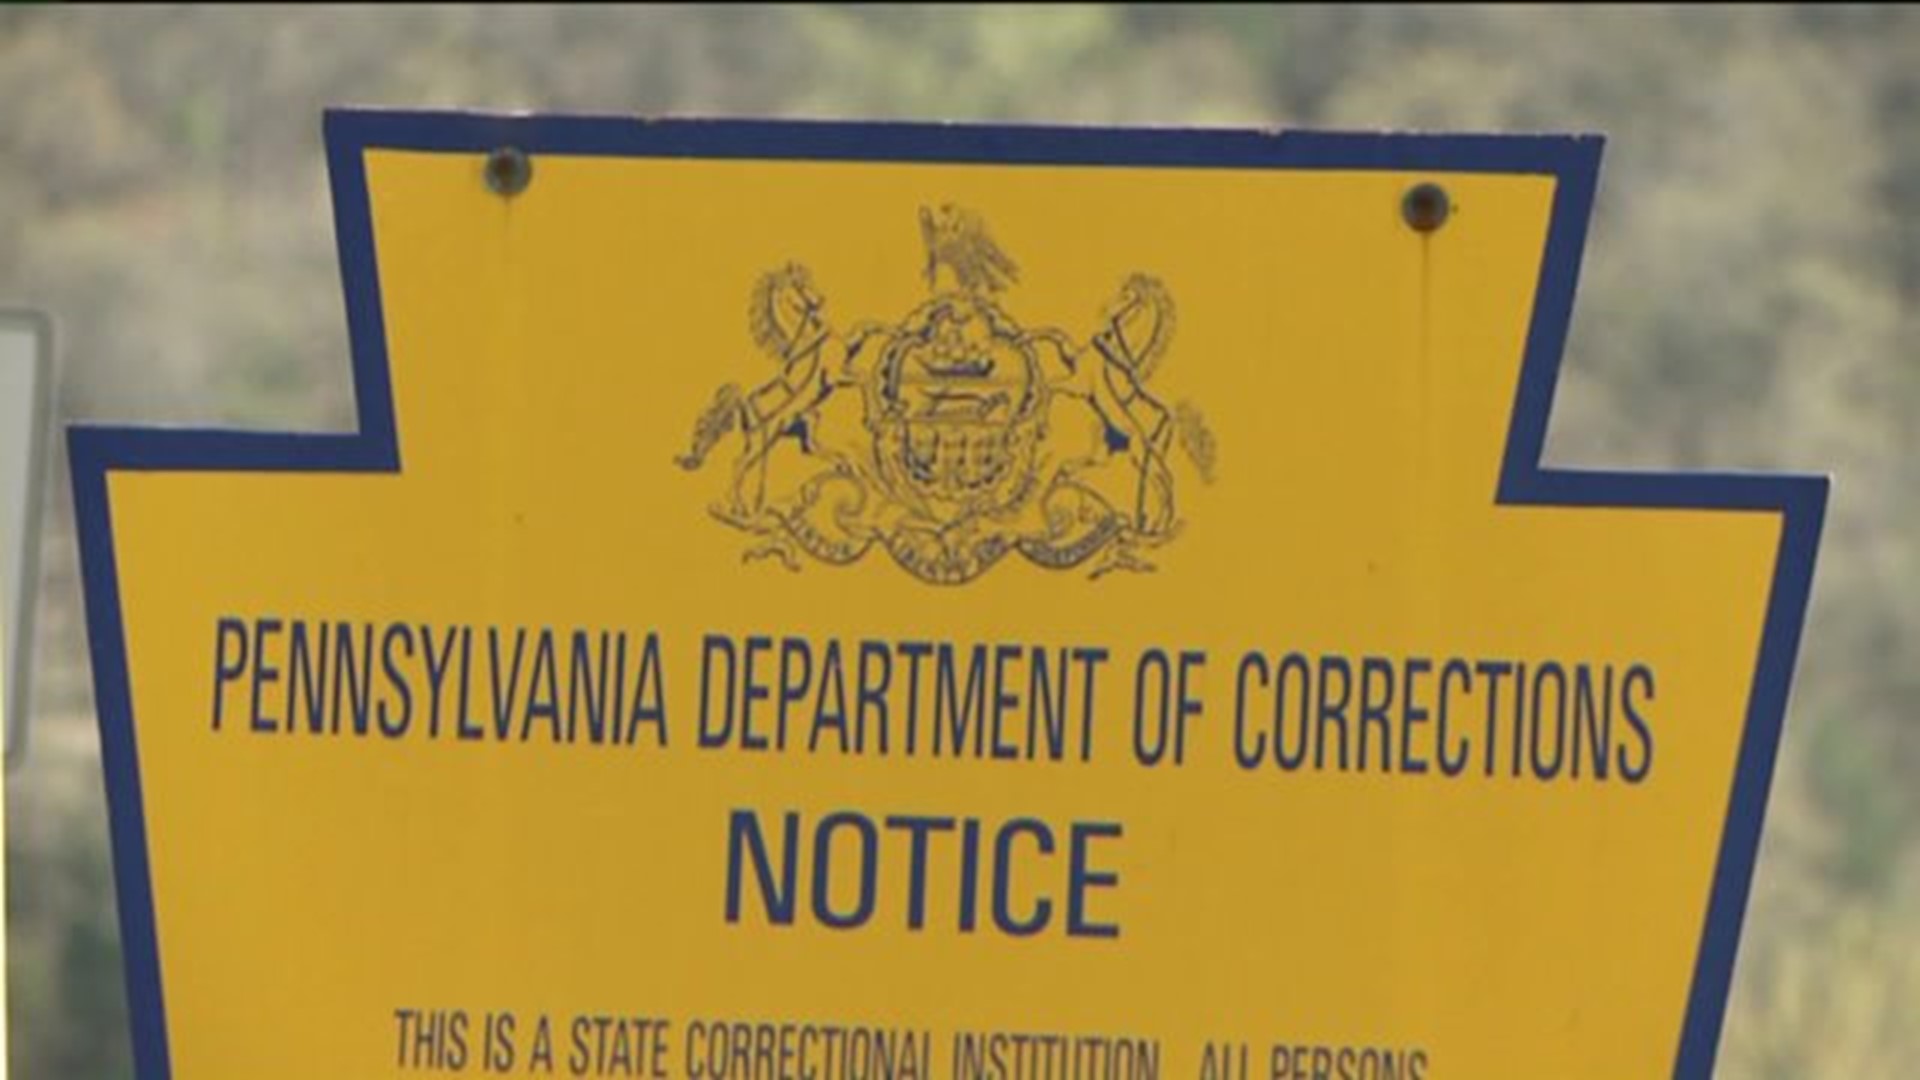 Governor Wolf issues executive order for early release of some inmates.